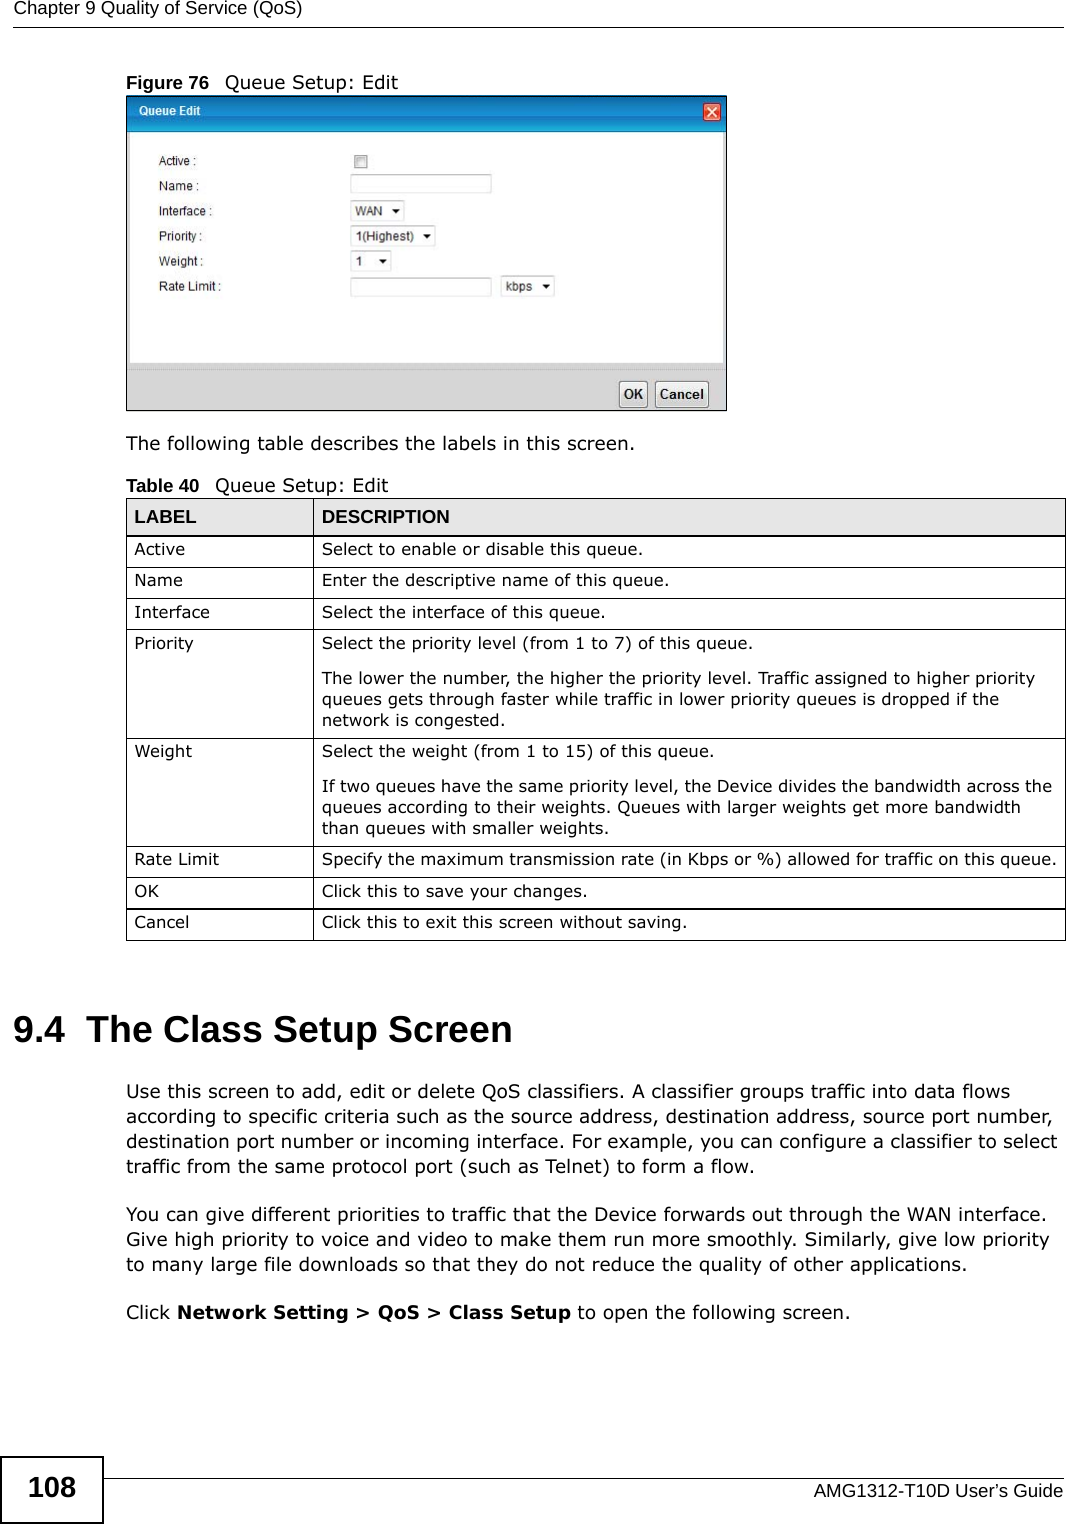 Chapter 9 Quality of Service (QoS)AMG1312-T10D User’s Guide108Figure 76   Queue Setup: Edit The following table describes the labels in this screen.  9.4  The Class Setup Screen   Use this screen to add, edit or delete QoS classifiers. A classifier groups traffic into data flows according to specific criteria such as the source address, destination address, source port number, destination port number or incoming interface. For example, you can configure a classifier to select traffic from the same protocol port (such as Telnet) to form a flow.You can give different priorities to traffic that the Device forwards out through the WAN interface. Give high priority to voice and video to make them run more smoothly. Similarly, give low priority to many large file downloads so that they do not reduce the quality of other applications. Click Network Setting &gt; QoS &gt; Class Setup to open the following screen.Table 40   Queue Setup: EditLABEL DESCRIPTIONActive Select to enable or disable this queue.Name Enter the descriptive name of this queue.Interface Select the interface of this queue.Priority Select the priority level (from 1 to 7) of this queue.The lower the number, the higher the priority level. Traffic assigned to higher priority queues gets through faster while traffic in lower priority queues is dropped if the network is congested.Weight Select the weight (from 1 to 15) of this queue. If two queues have the same priority level, the Device divides the bandwidth across the queues according to their weights. Queues with larger weights get more bandwidth than queues with smaller weights.Rate Limit Specify the maximum transmission rate (in Kbps or %) allowed for traffic on this queue.OK Click this to save your changes.Cancel Click this to exit this screen without saving.